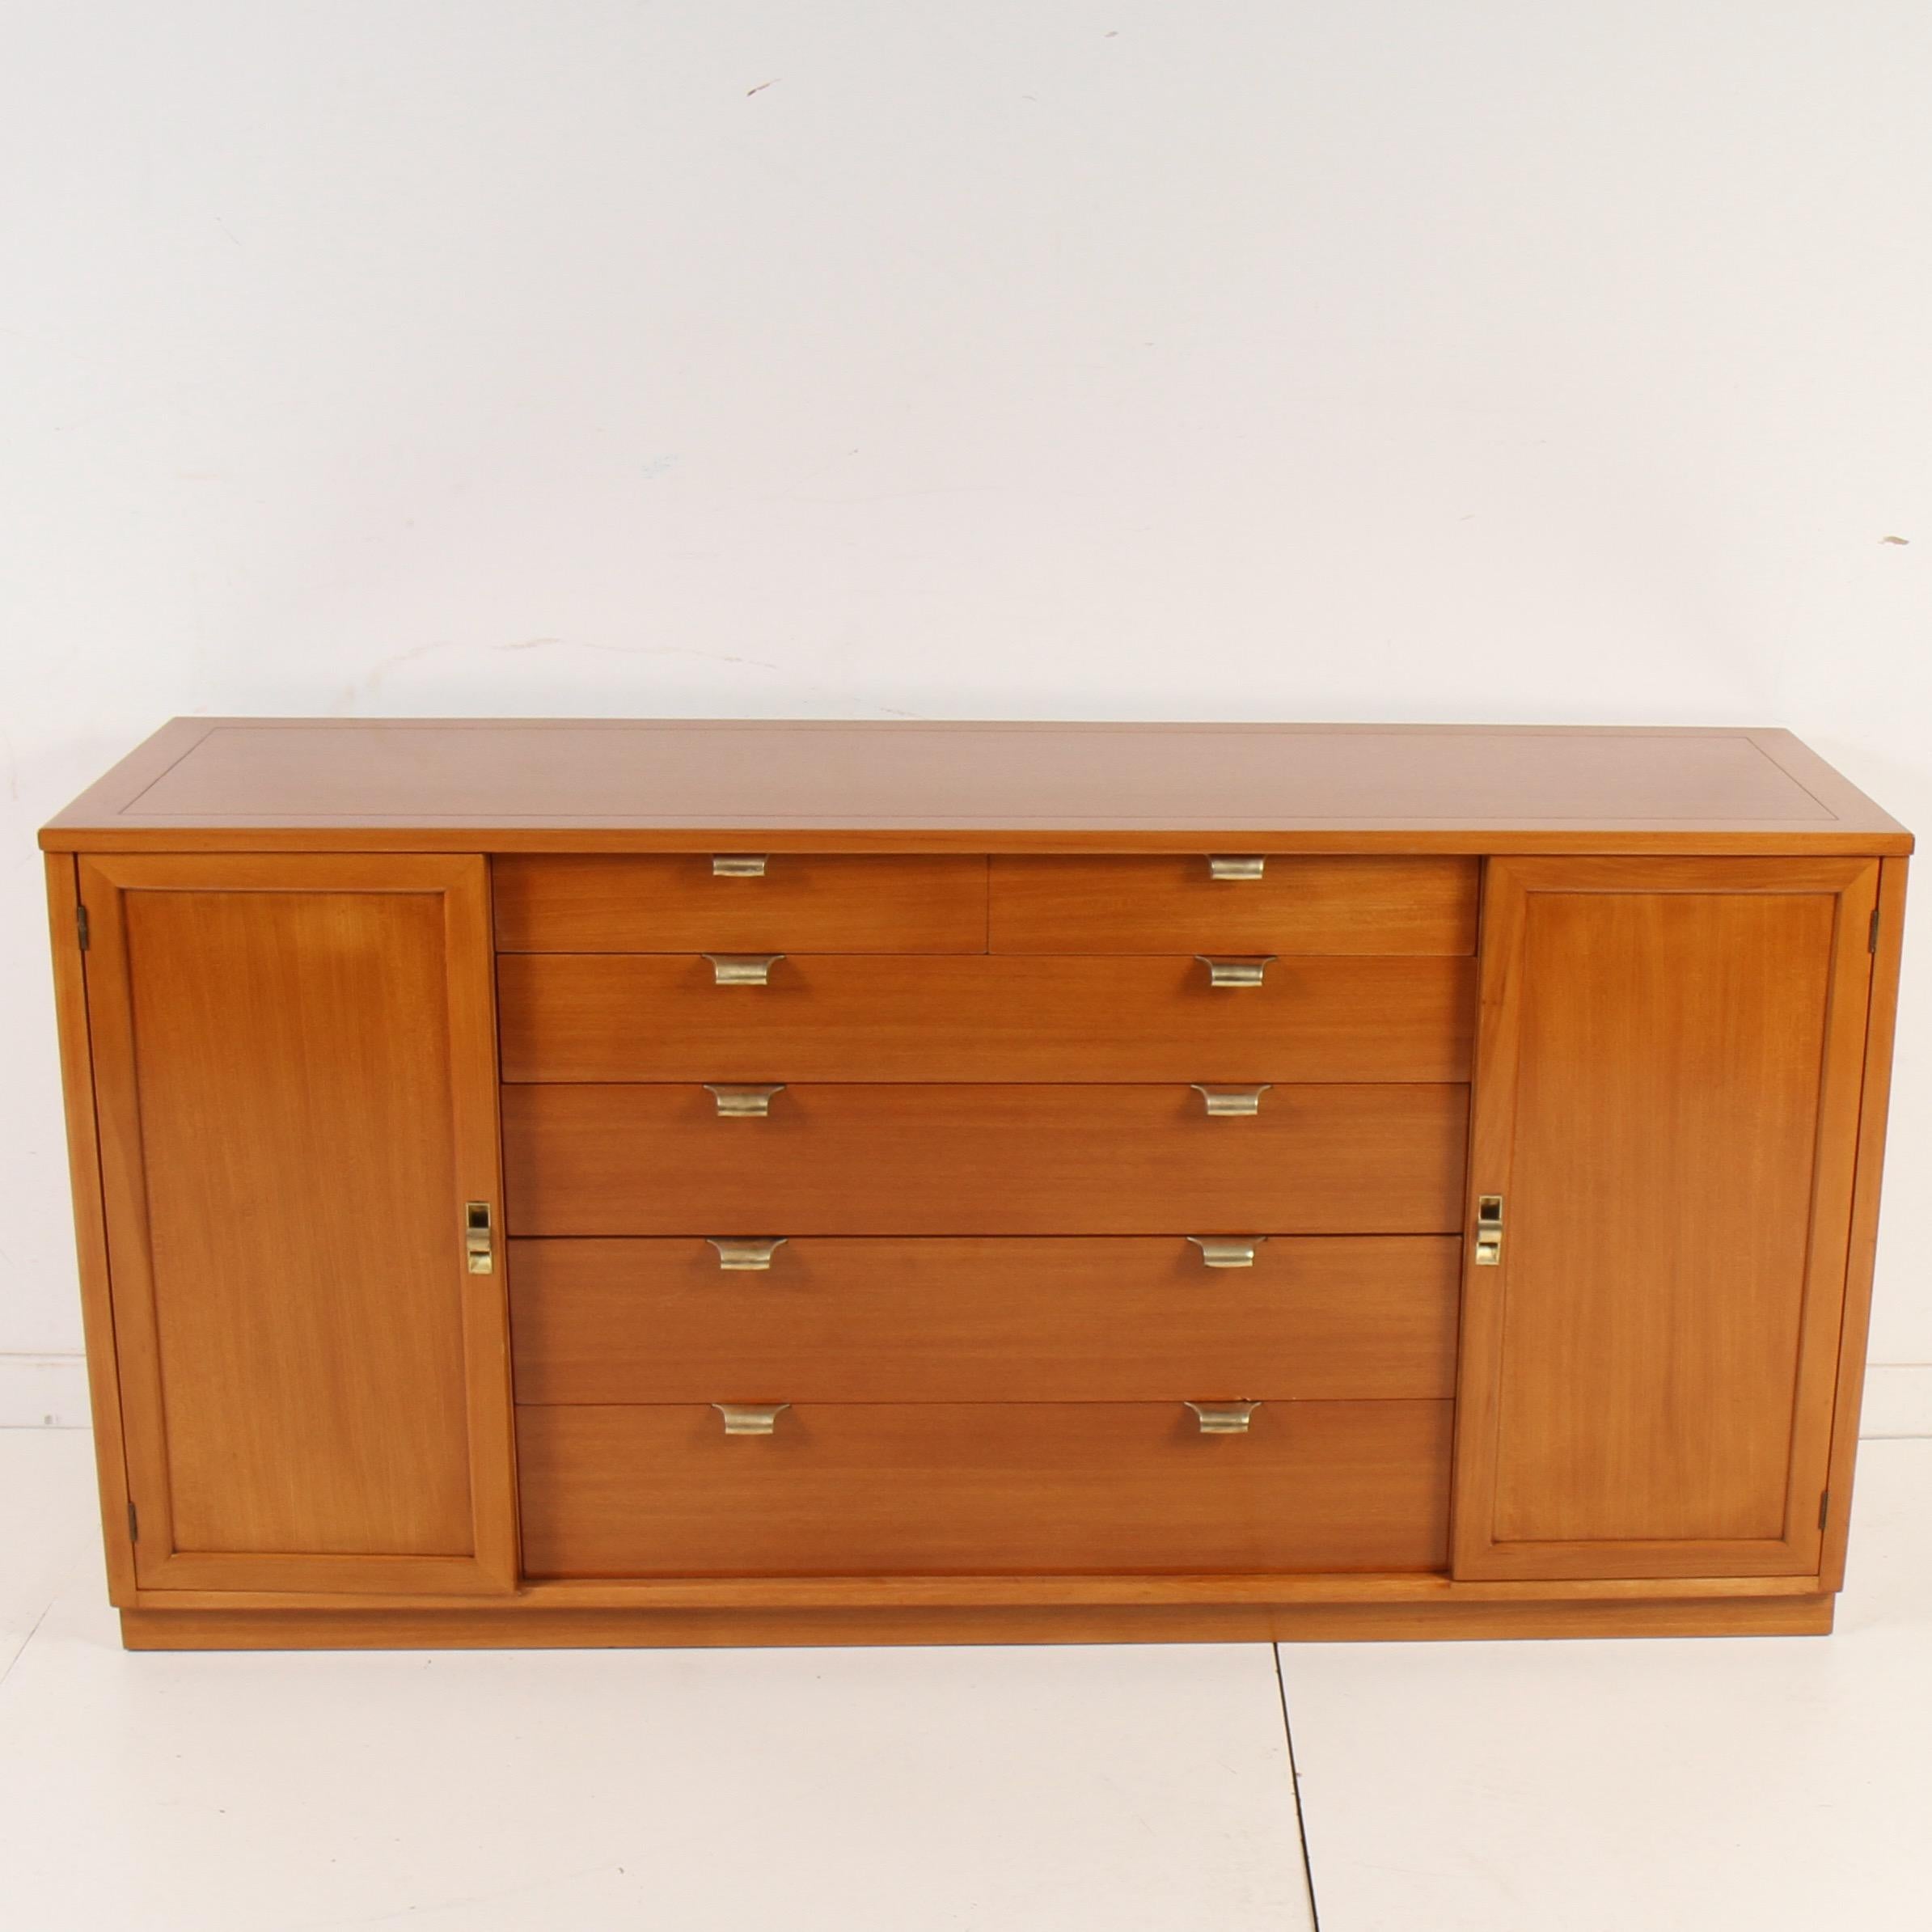 Late 40s era elm sideboard by Edward Wormley for Drexel. Newly refinished, this piece features six shelves for plates and six drawers for silverware and various other items. Could also be used as a dresser.

Edward Wormley (1907-1995) created many